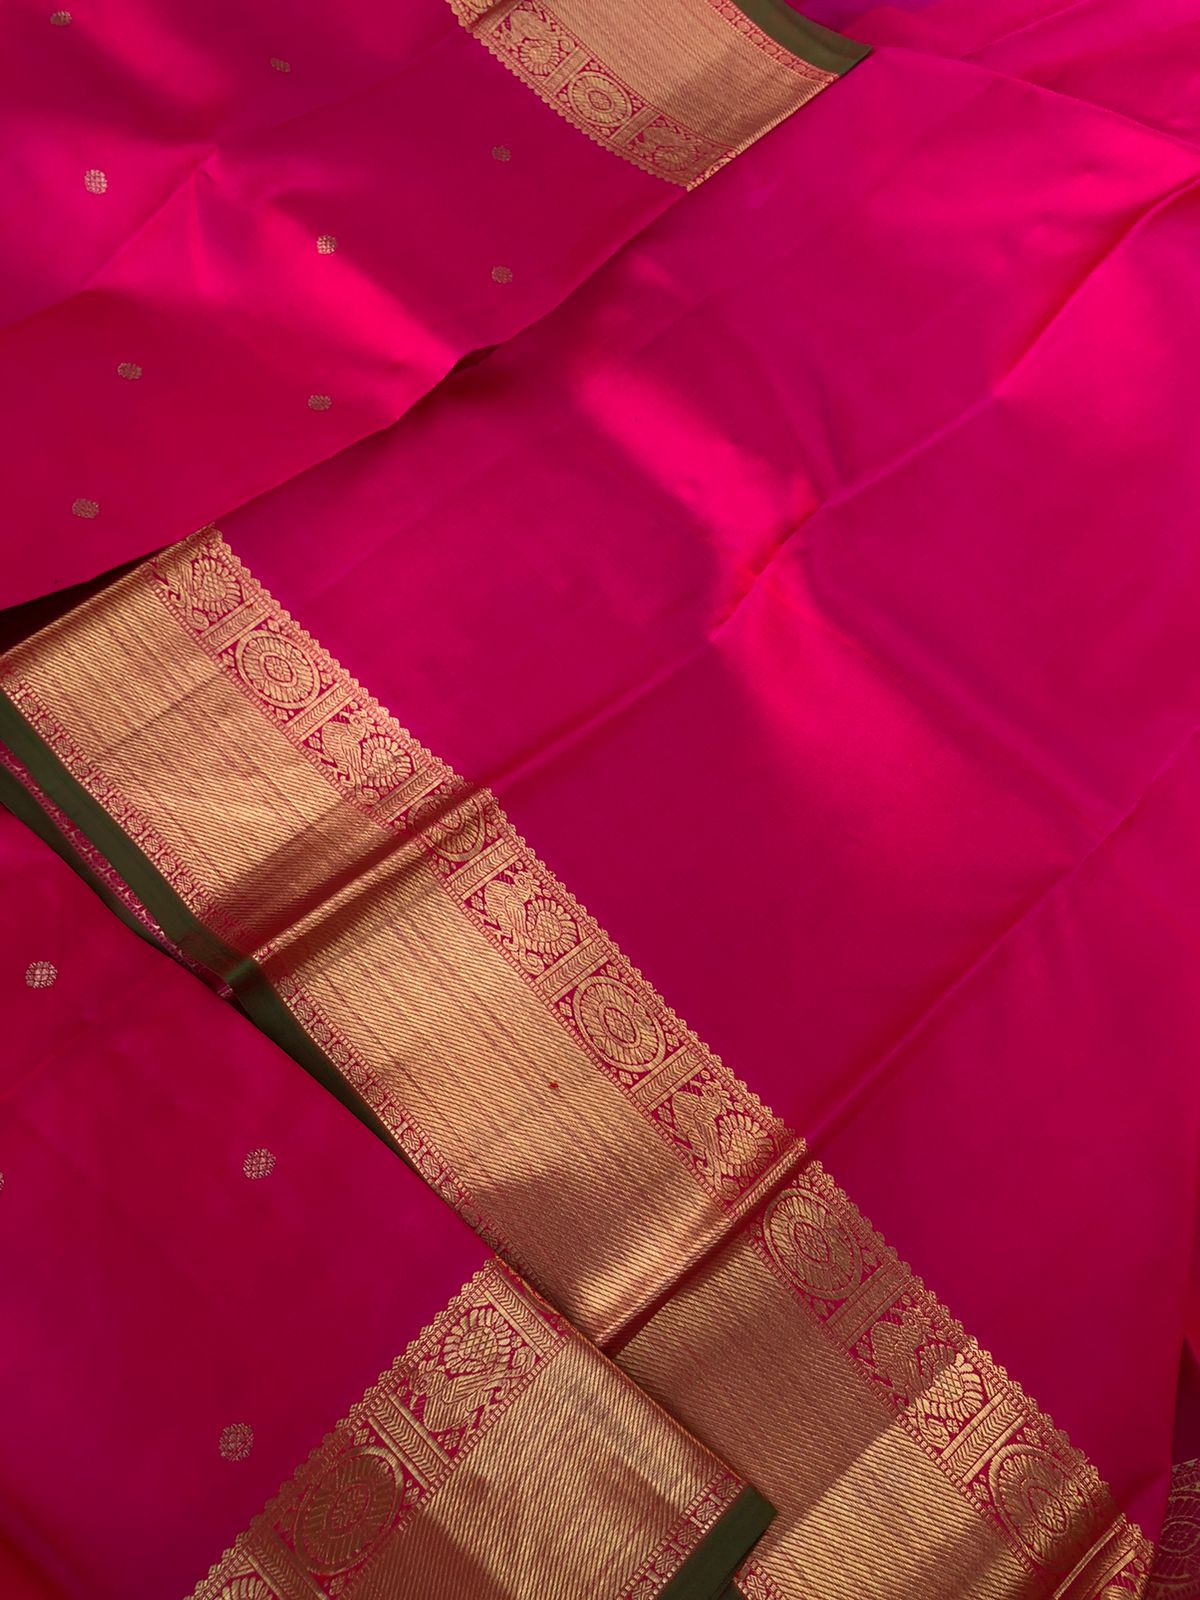 Swarnam - The Solid Kanchivarams - gorgeous rani pink and gold